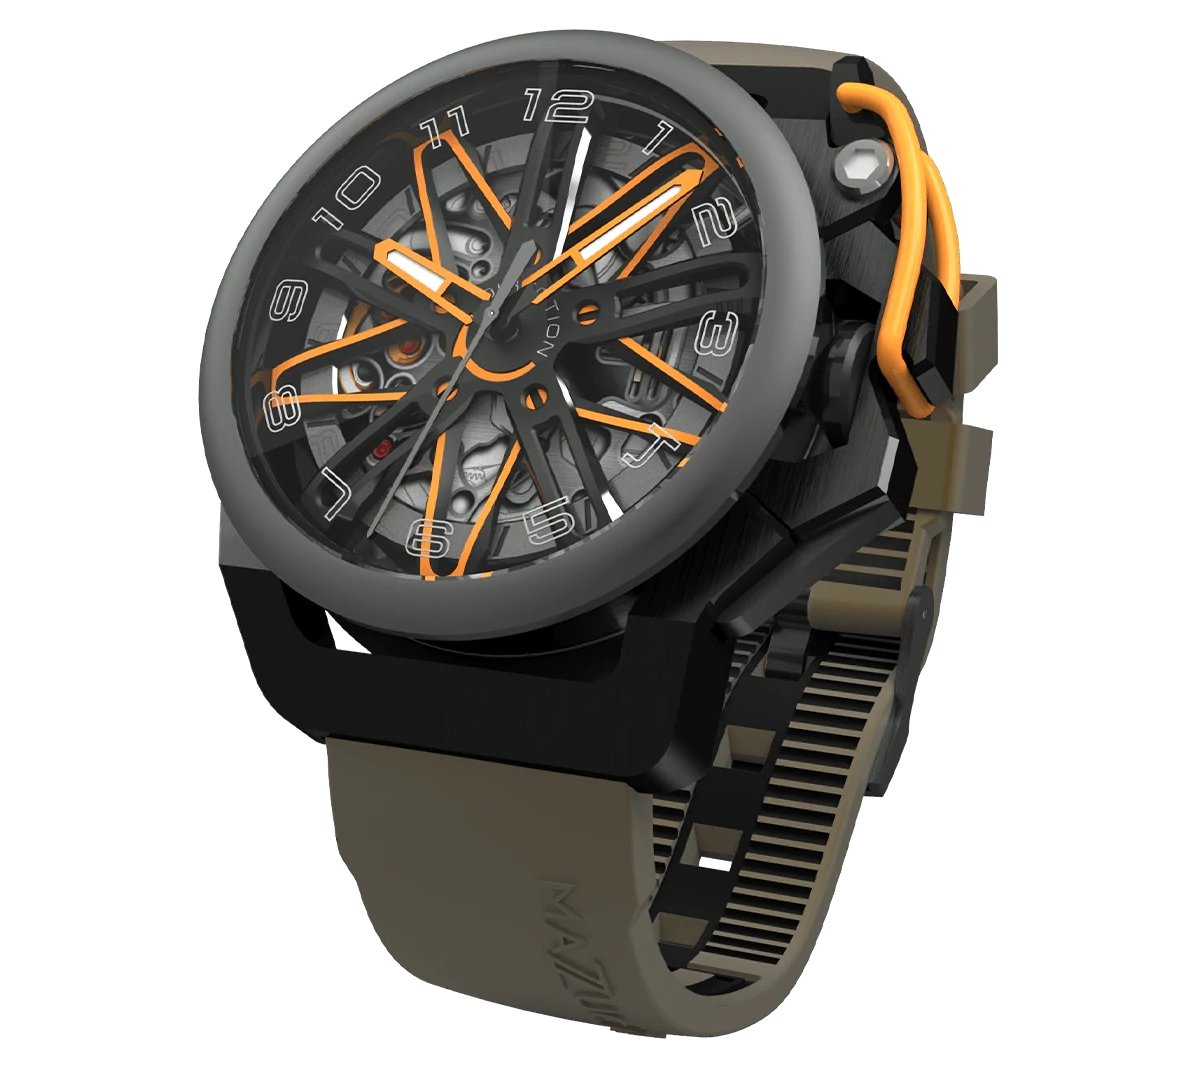 Mazzucato RIM GT Men's Chronograph Watch Orange GT4-OR - Watches & Crystals